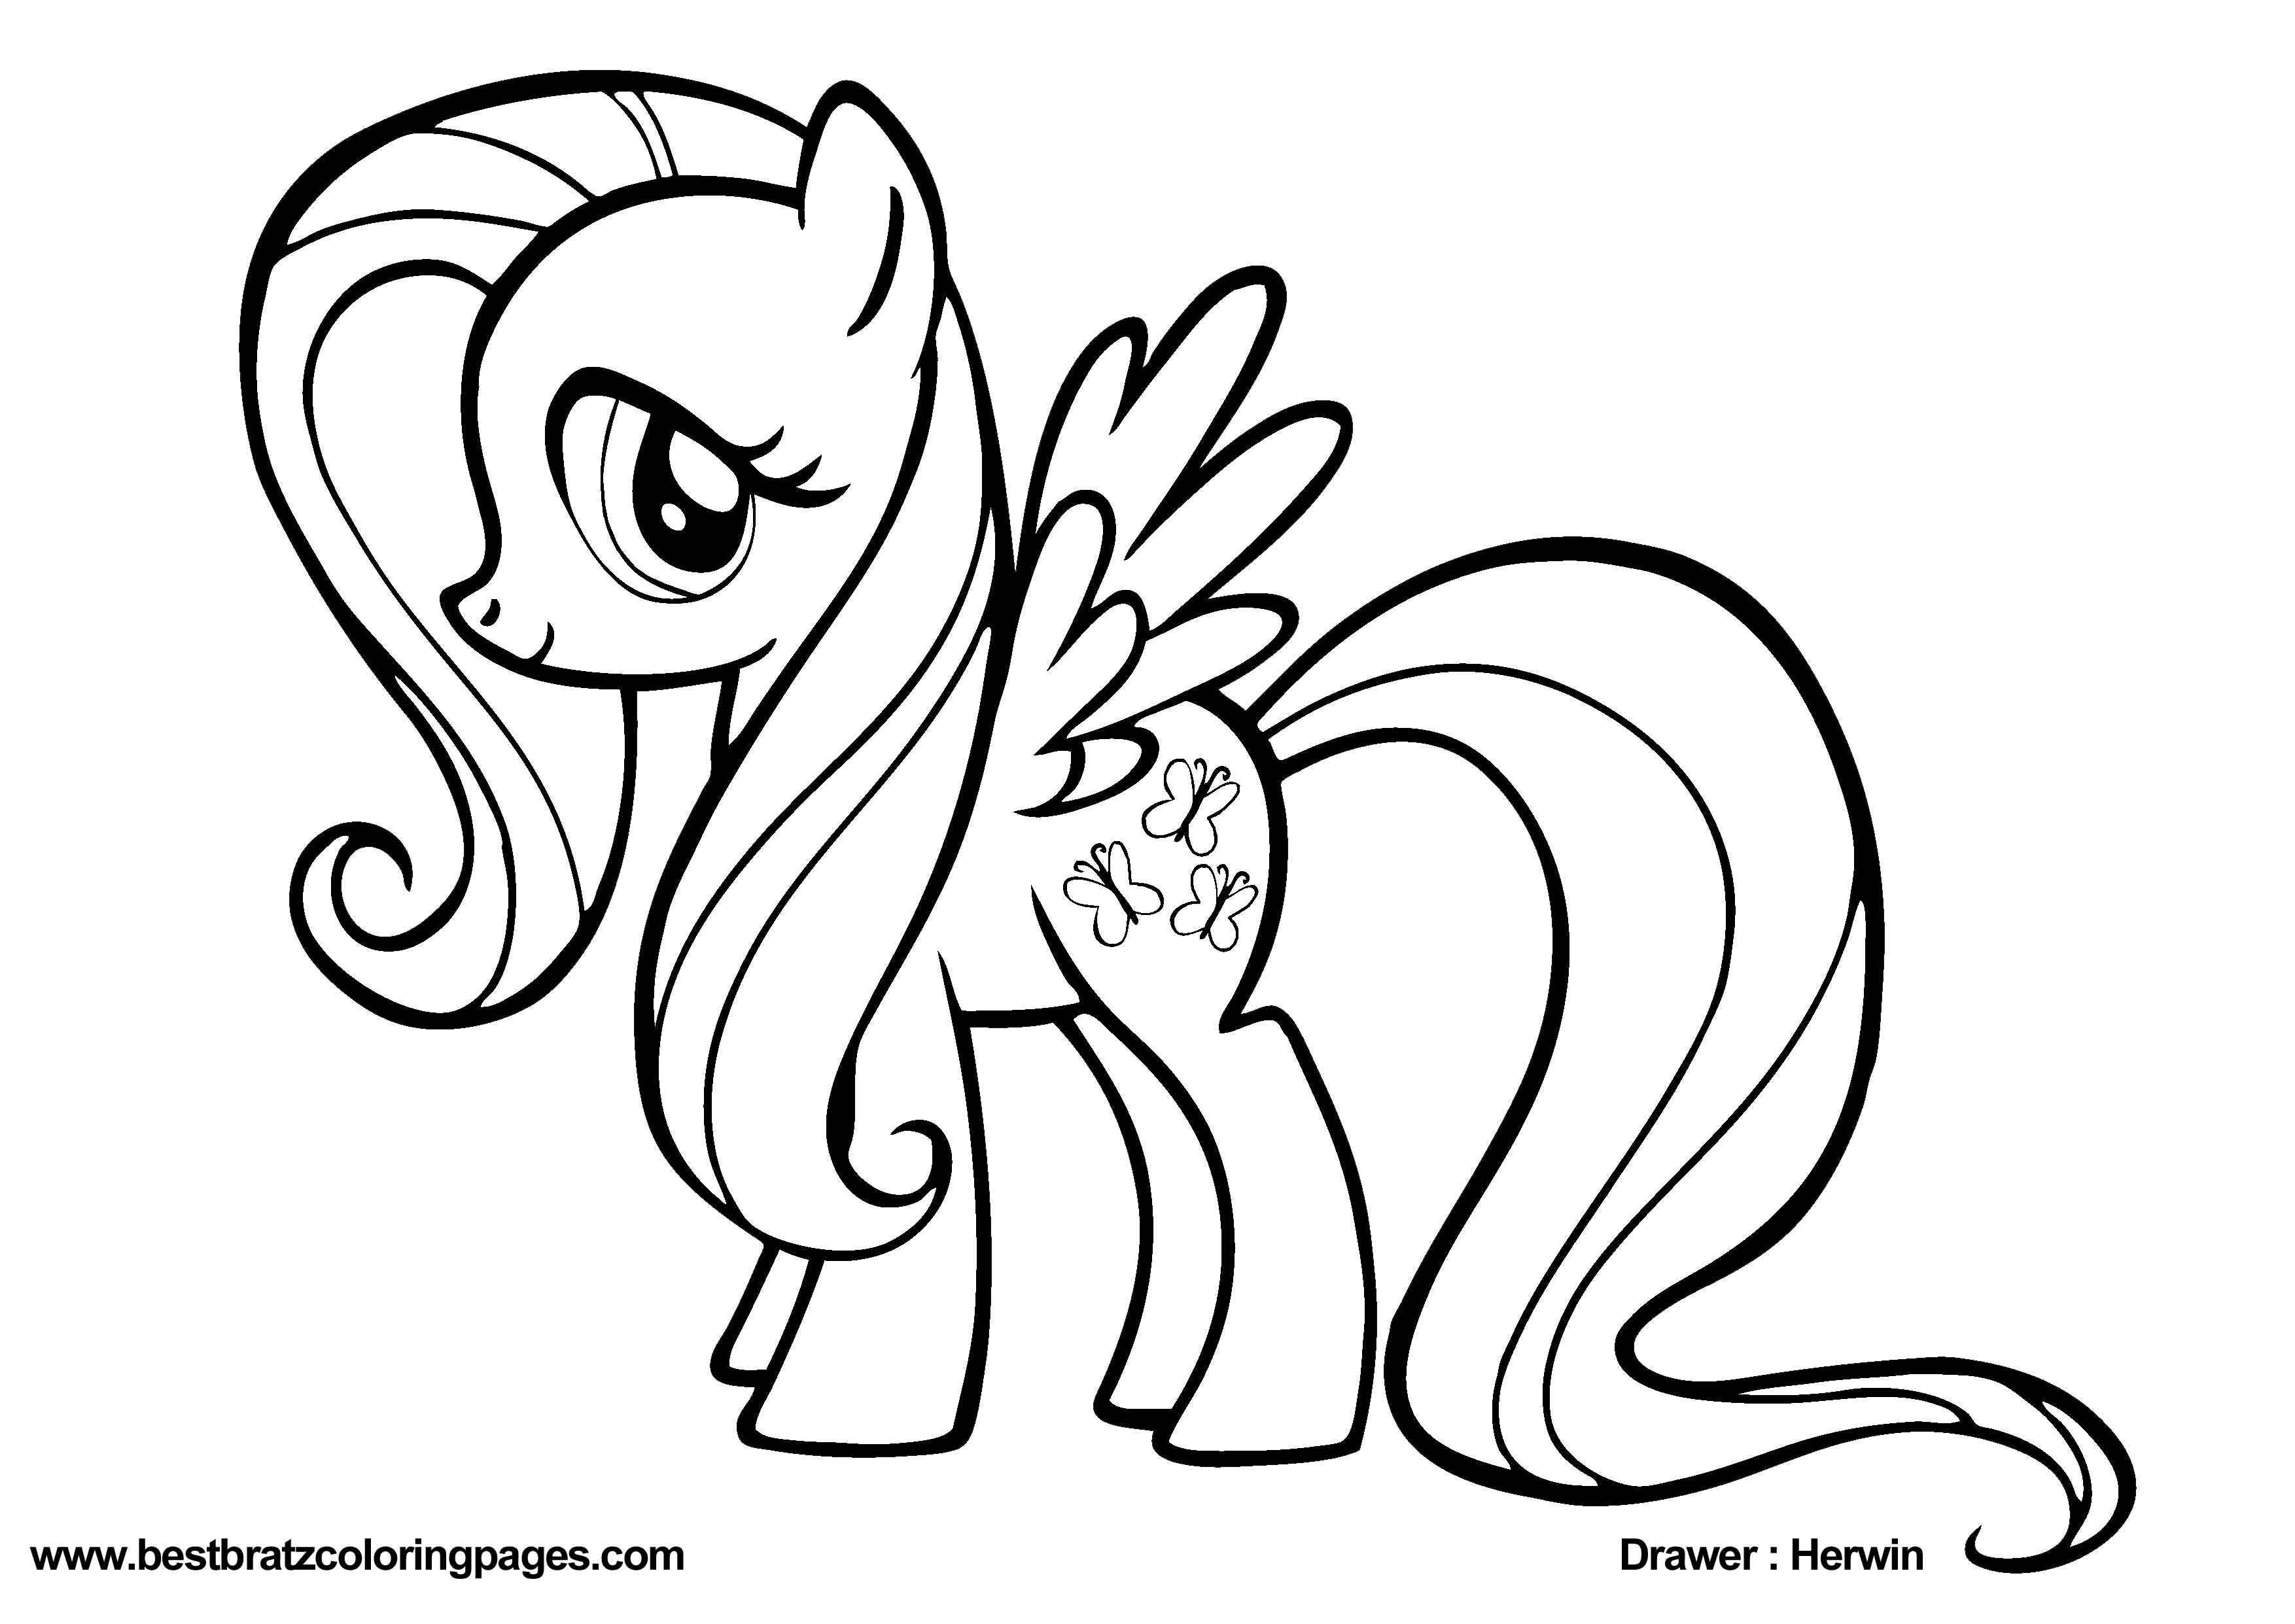 Pony Coloring Sheet - Coloring Pages for Kids and for Adults